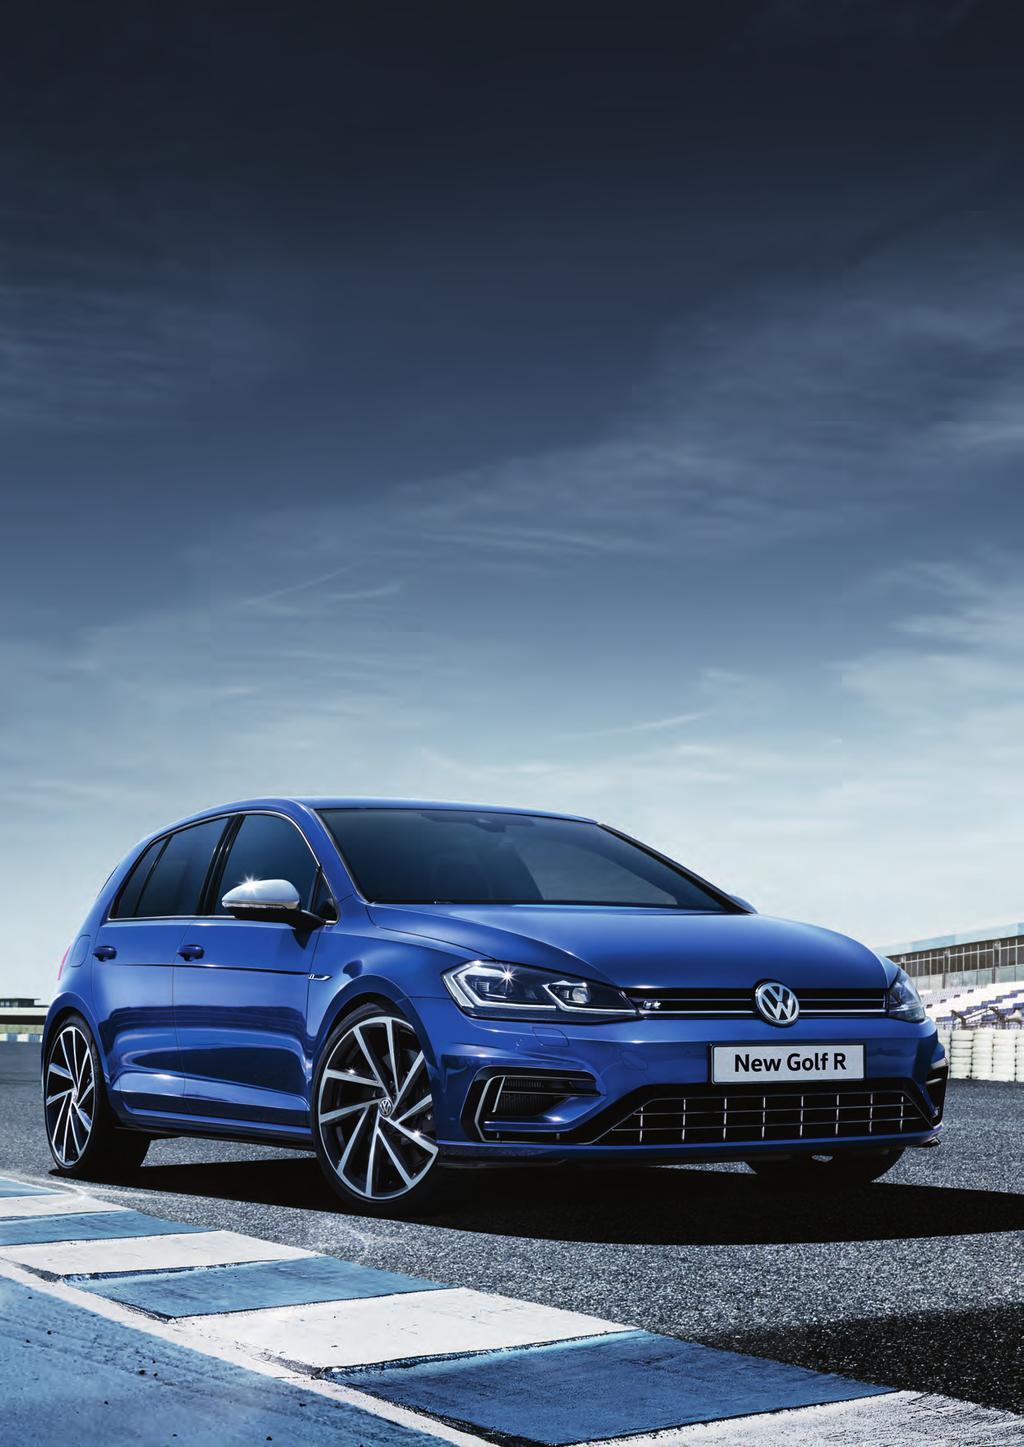 THE LEGEND It s R-Rated The new Golf R is the perfect formula for explosive power and performance, adding up to a spine-tingling explosion of driving pleasure.